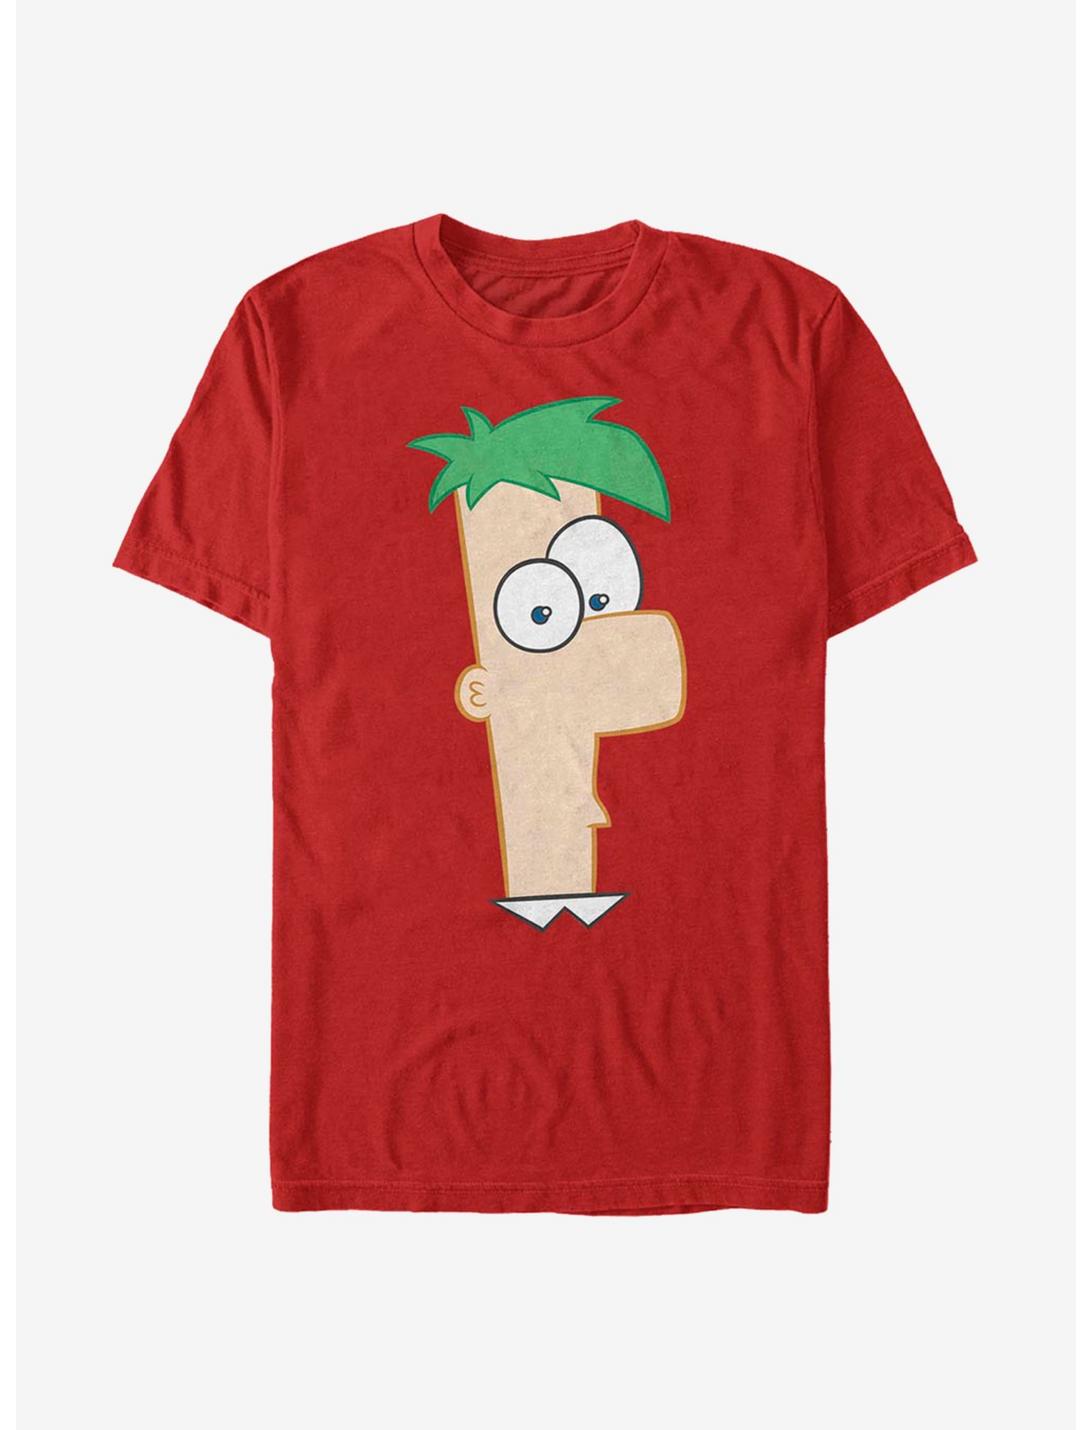 Disney Phineas And Ferb Large Ferb T-Shirt, RED, hi-res